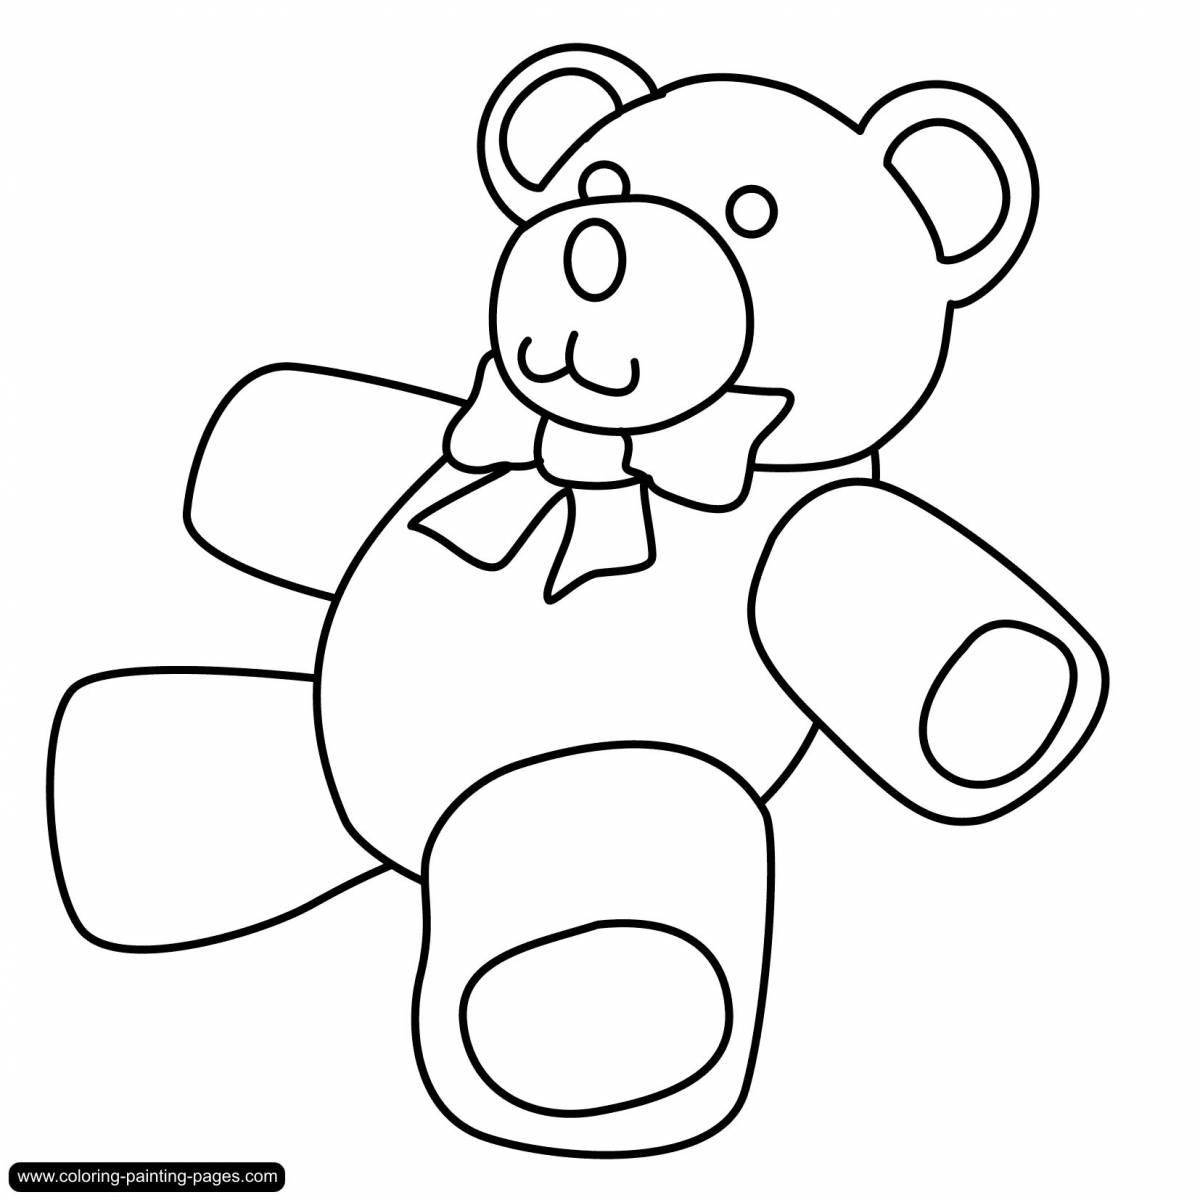 Comforting teddy bear coloring page